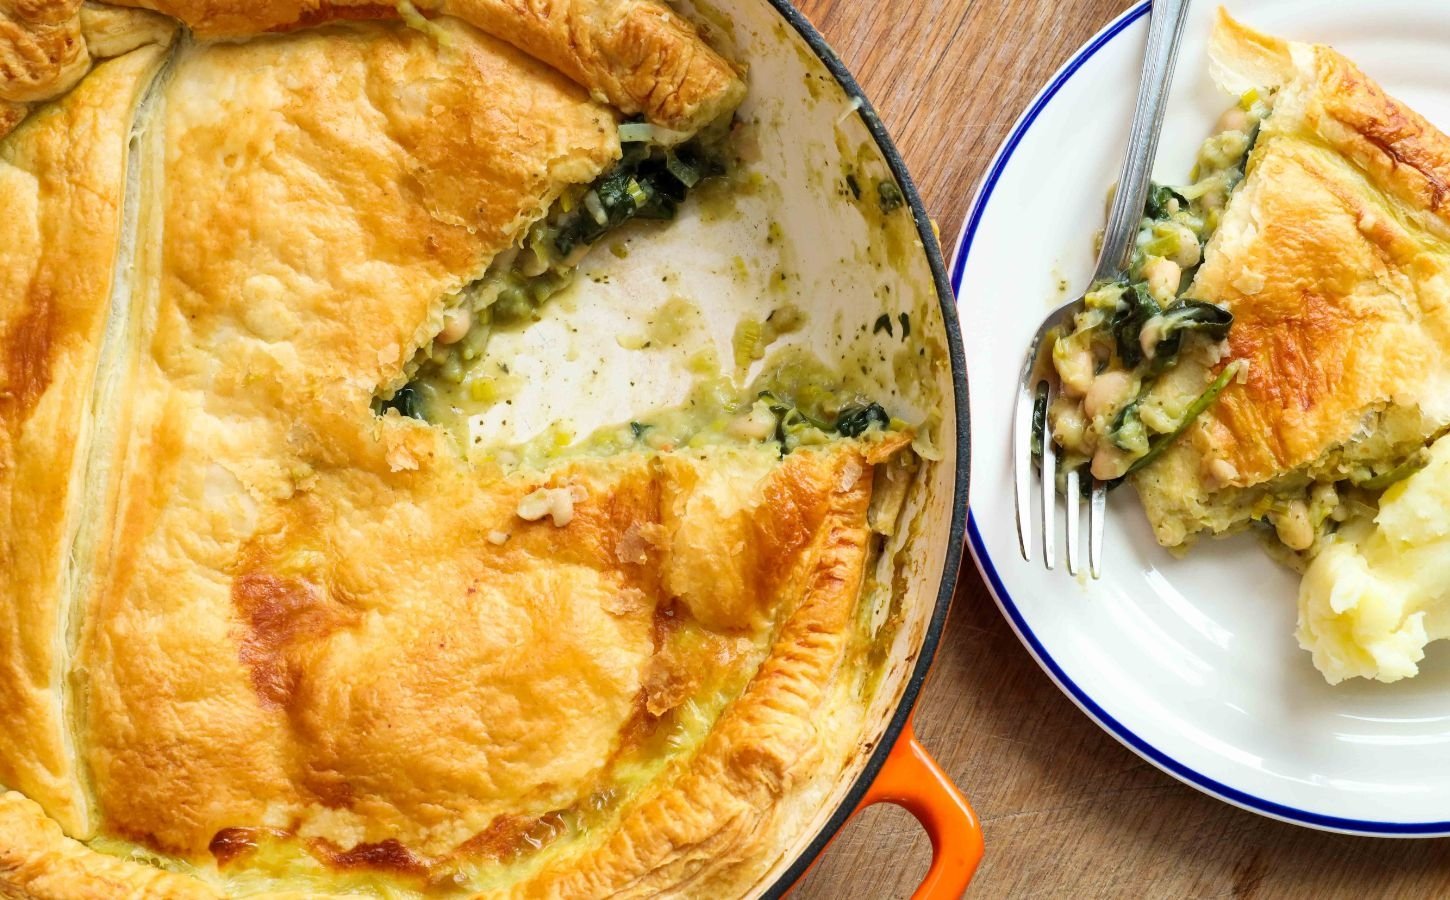 Creamy cannellini pie made with plant-based puff pastry, pesto and protein-packed cannellini beans